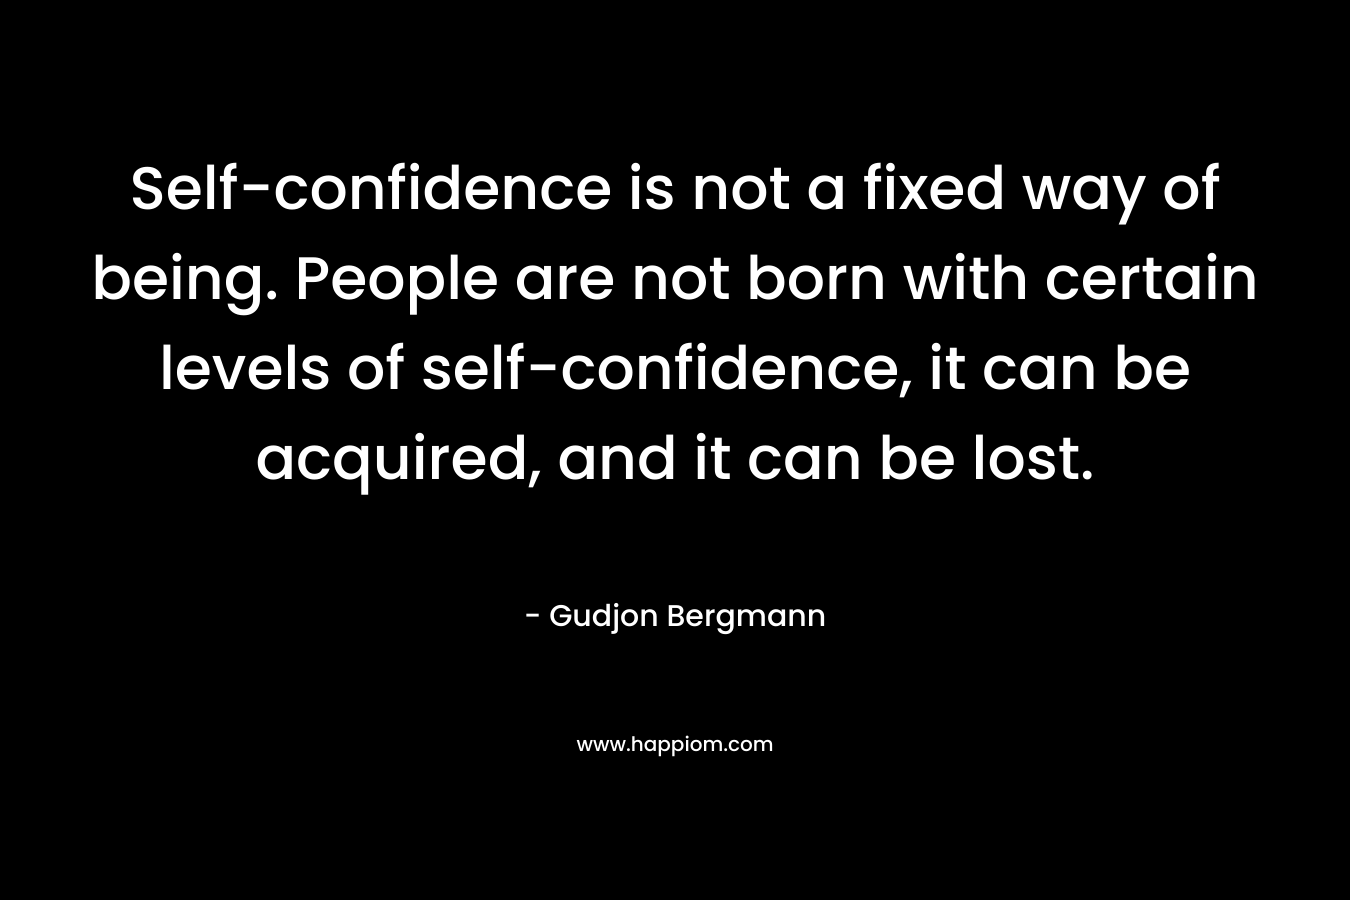 Self-confidence is not a fixed way of being. People are not born with certain levels of self-confidence, it can be acquired, and it can be lost.